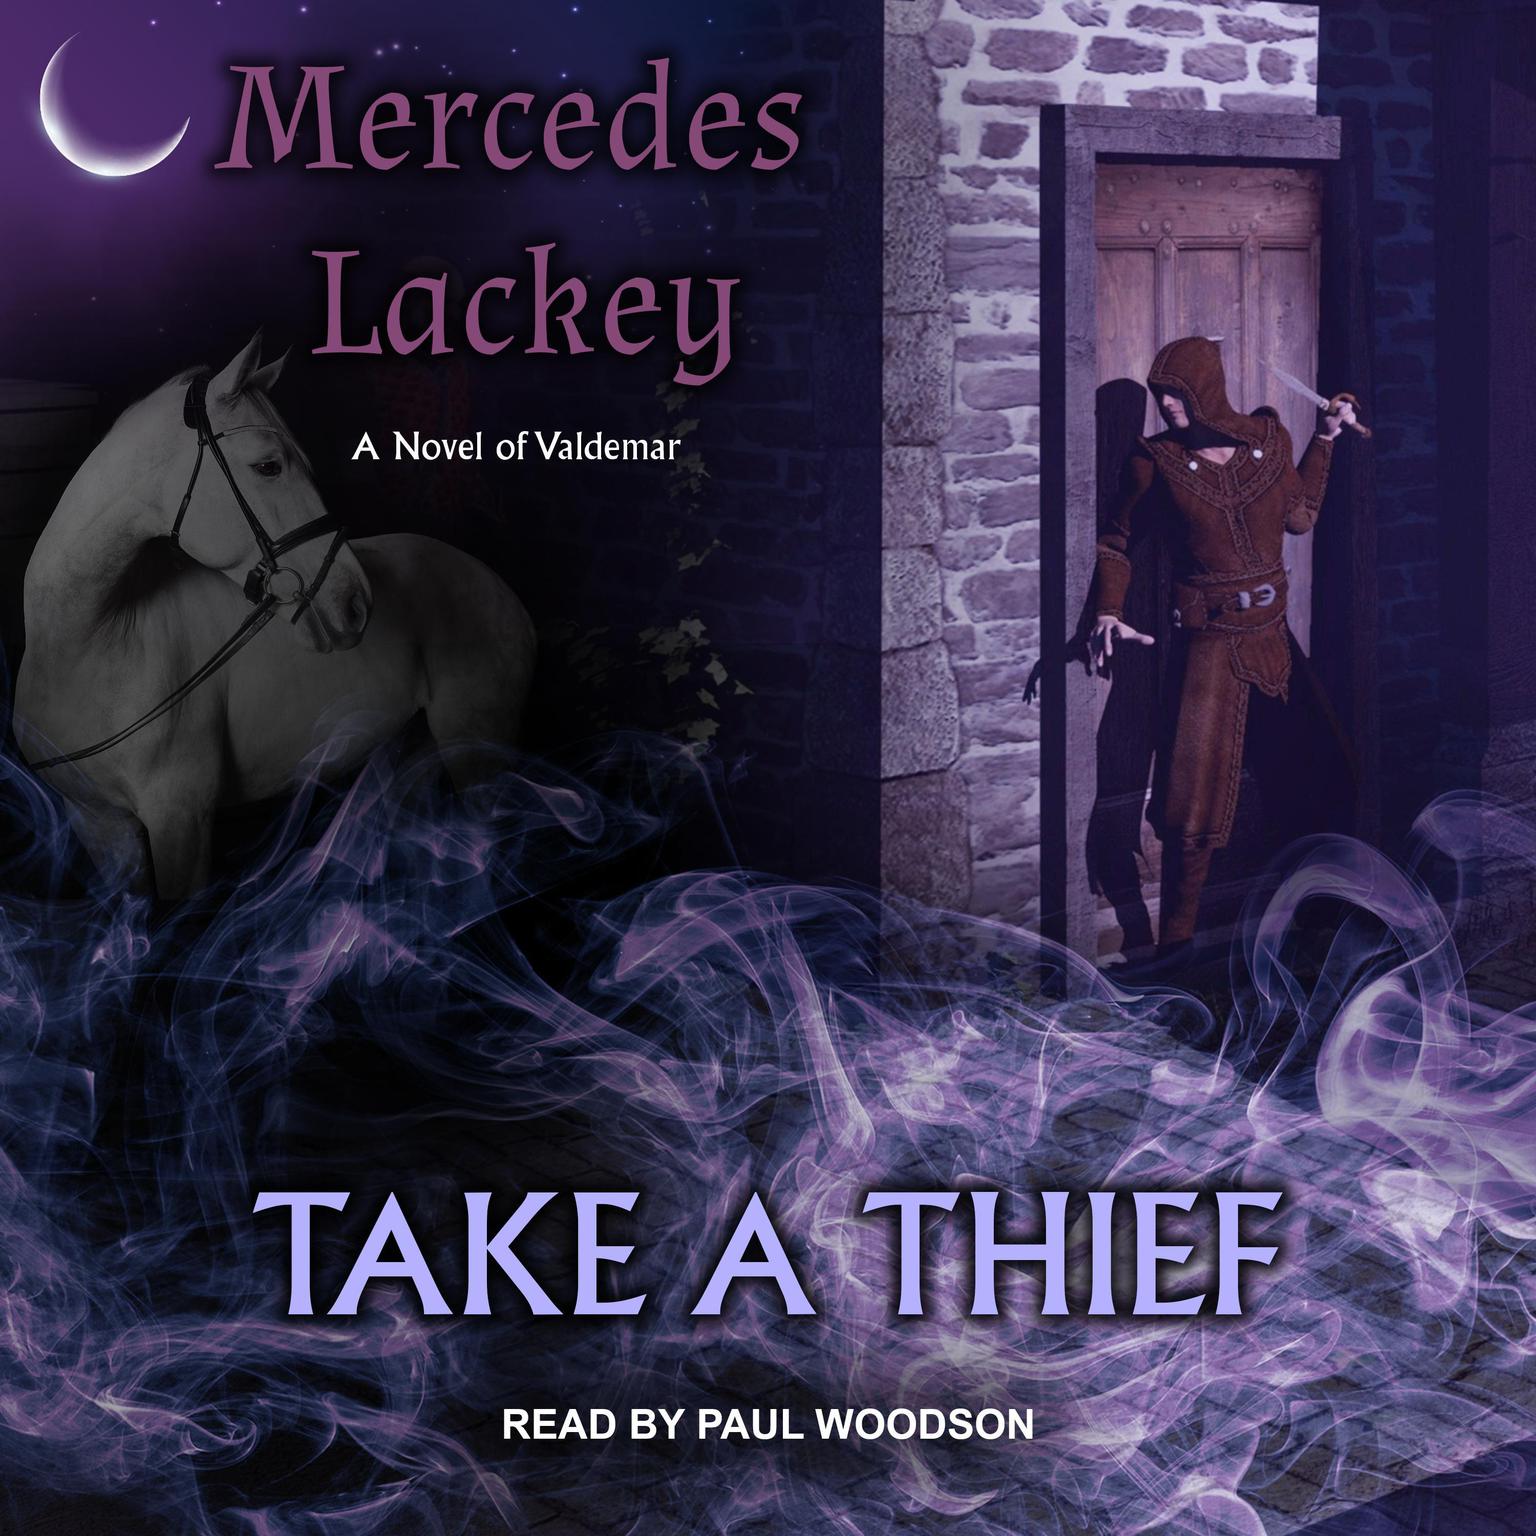 Take a Thief: A Novel of Valdemar Audiobook, by Mercedes Lackey